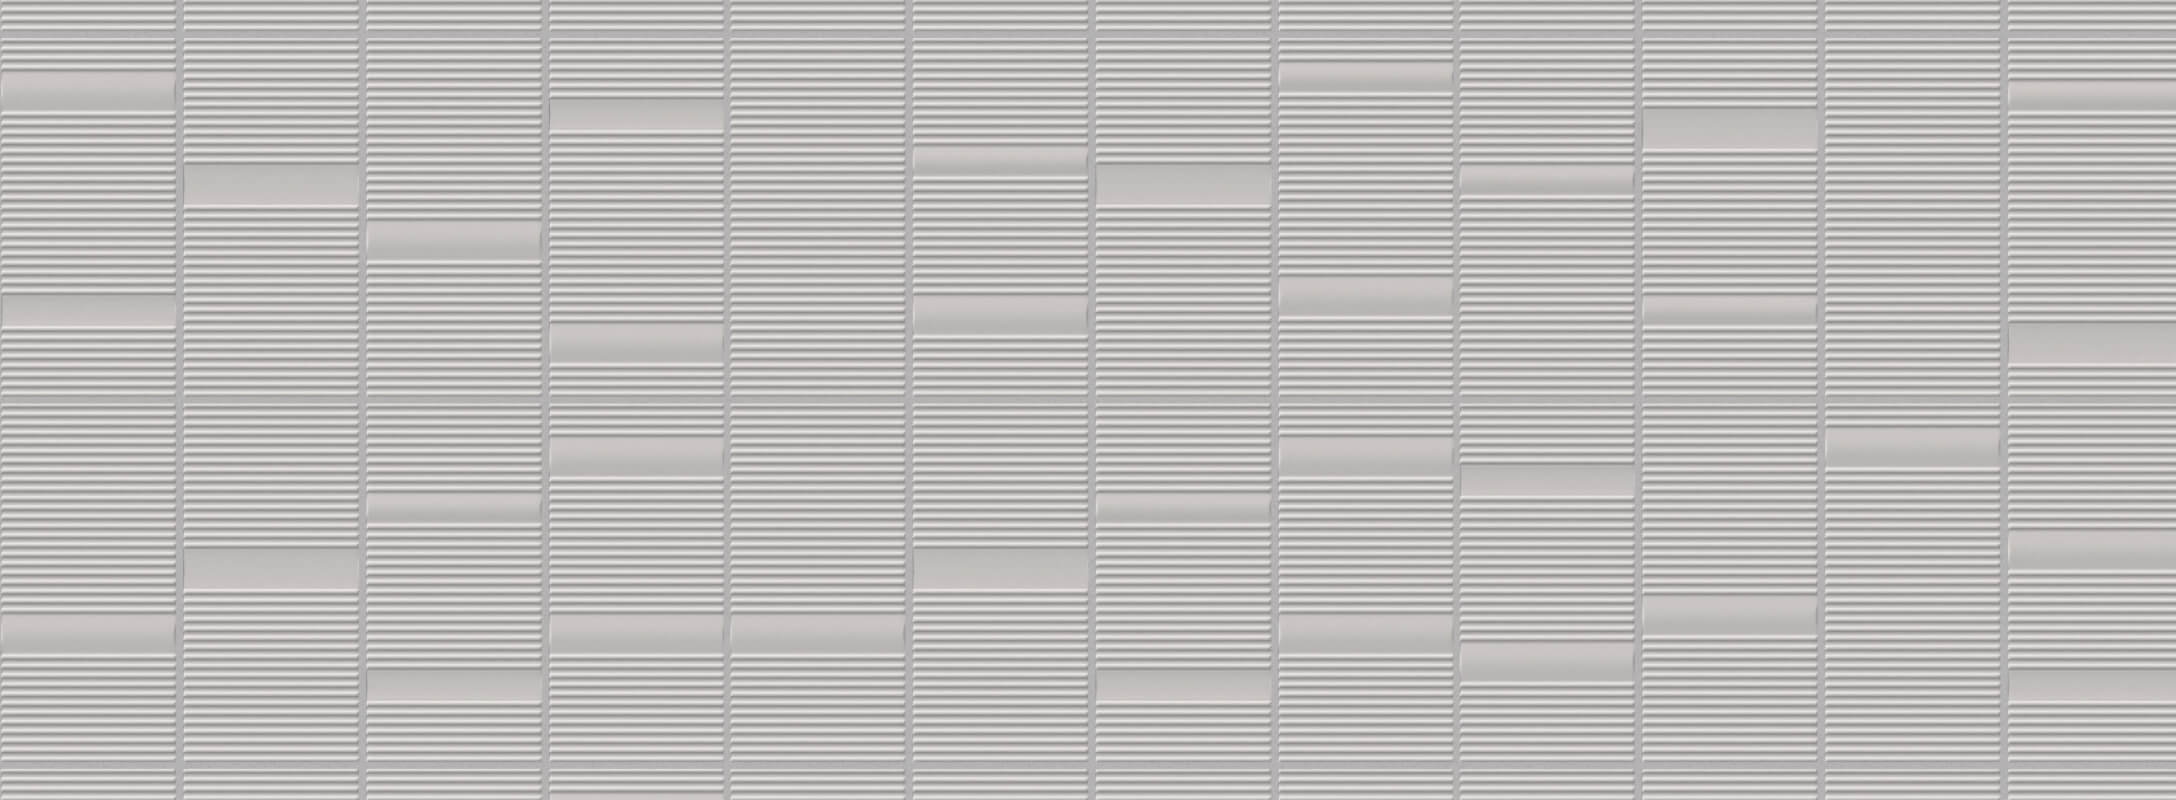 Close-up of grey wall tiles with a linear textured pattern, creating a sleek and modern aesthetic for contemporary kitchen designs